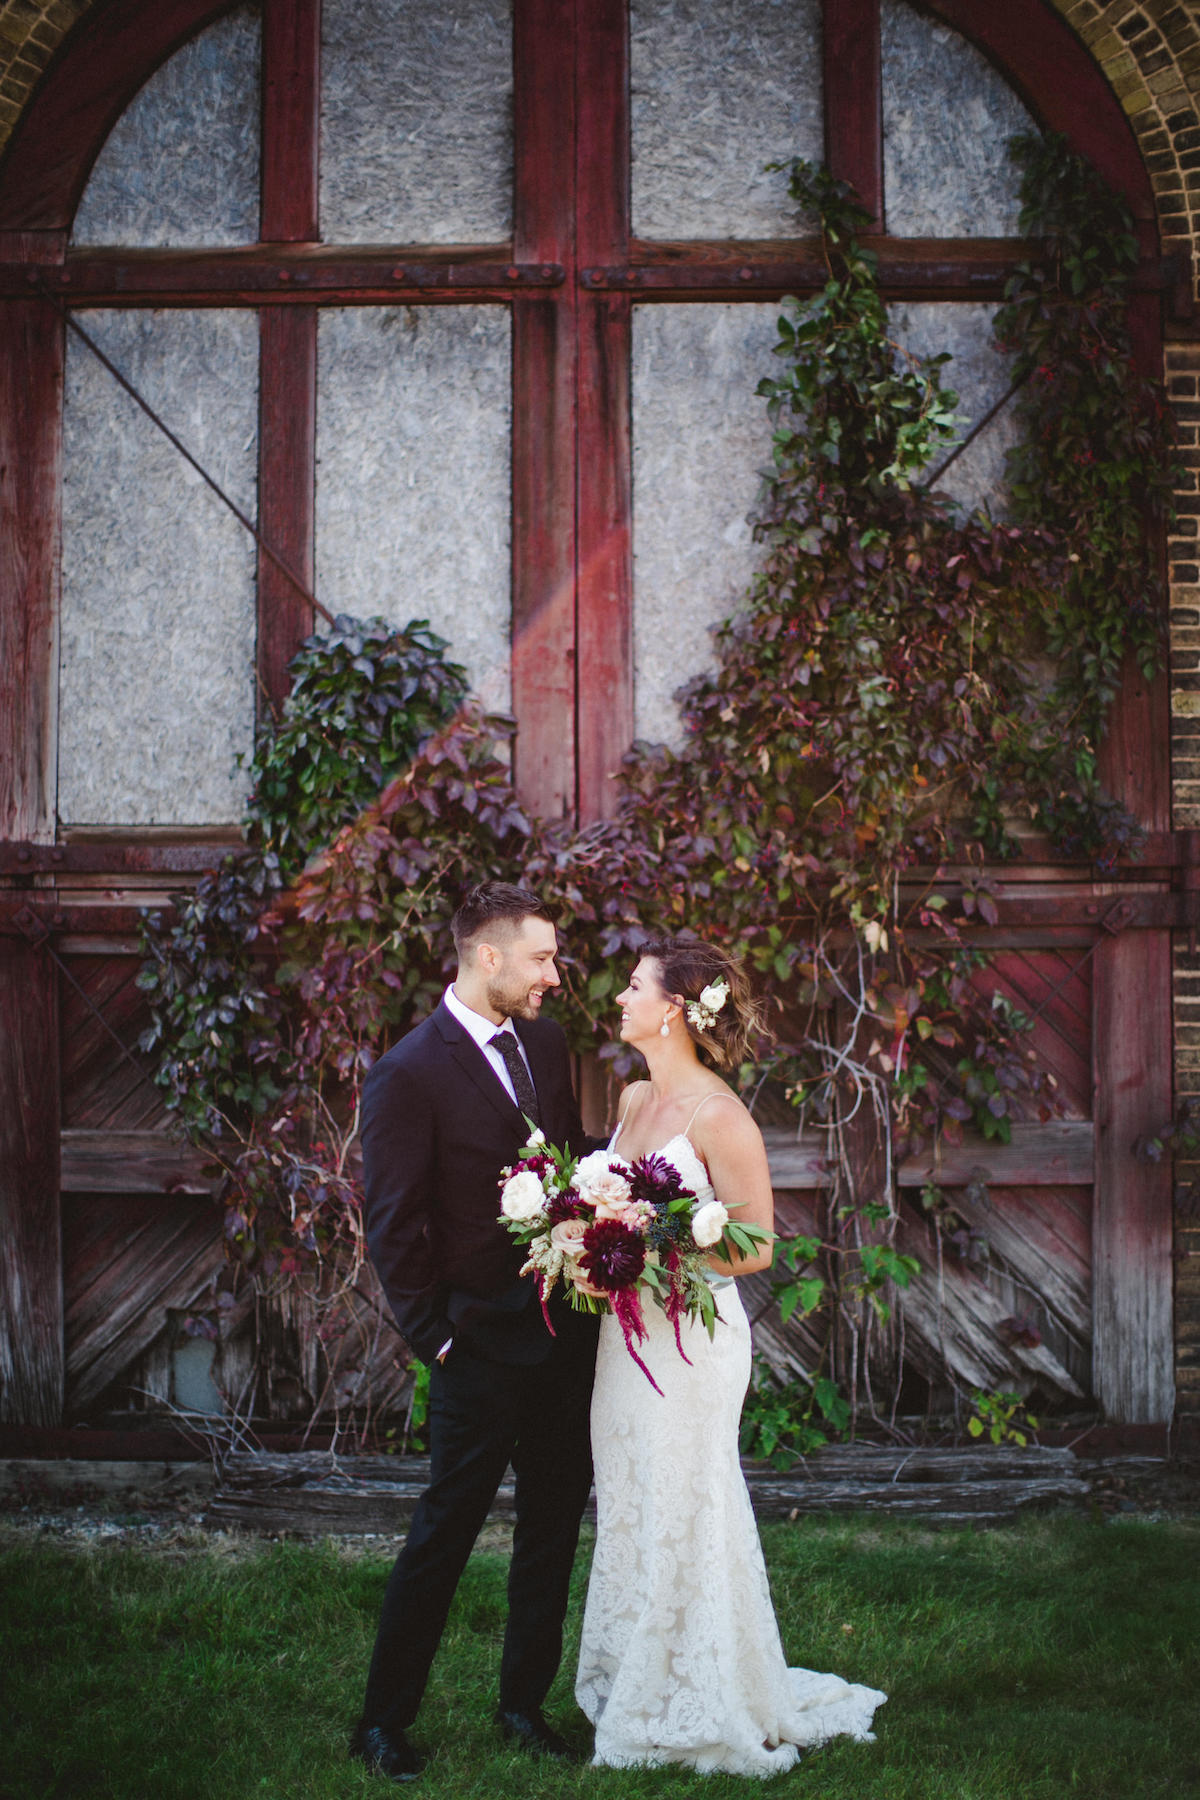 Bride and groom stand outside reclaimed train station for an industrial chic wedding